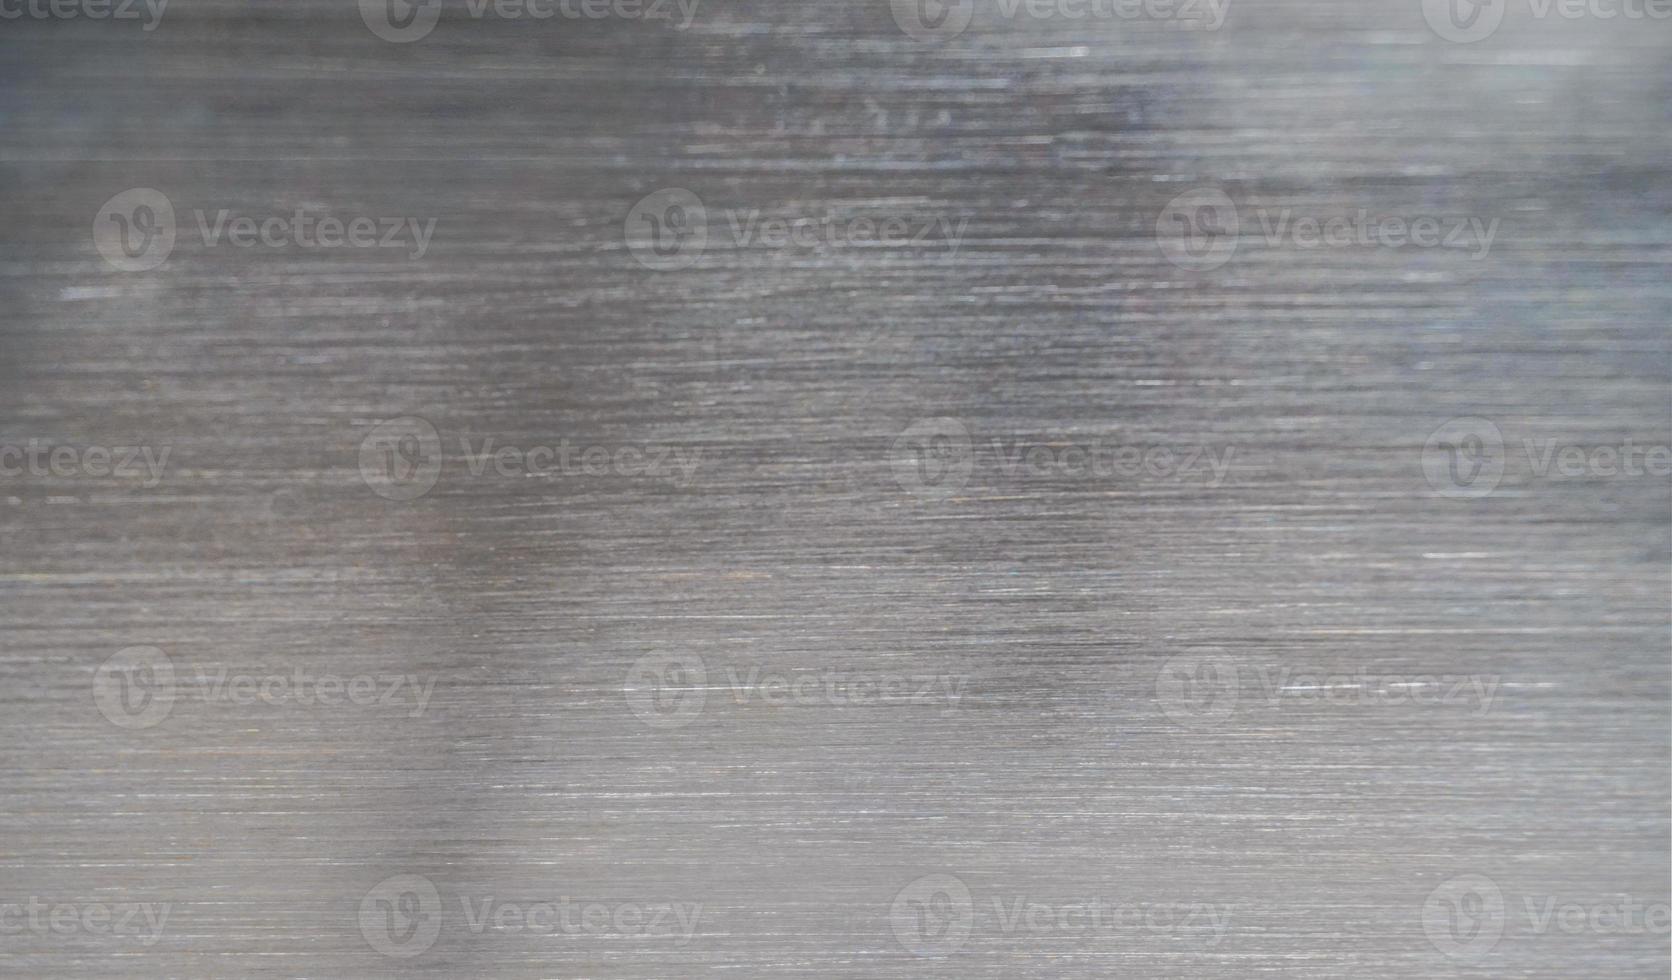 Brushed Metal Texture - Background photo